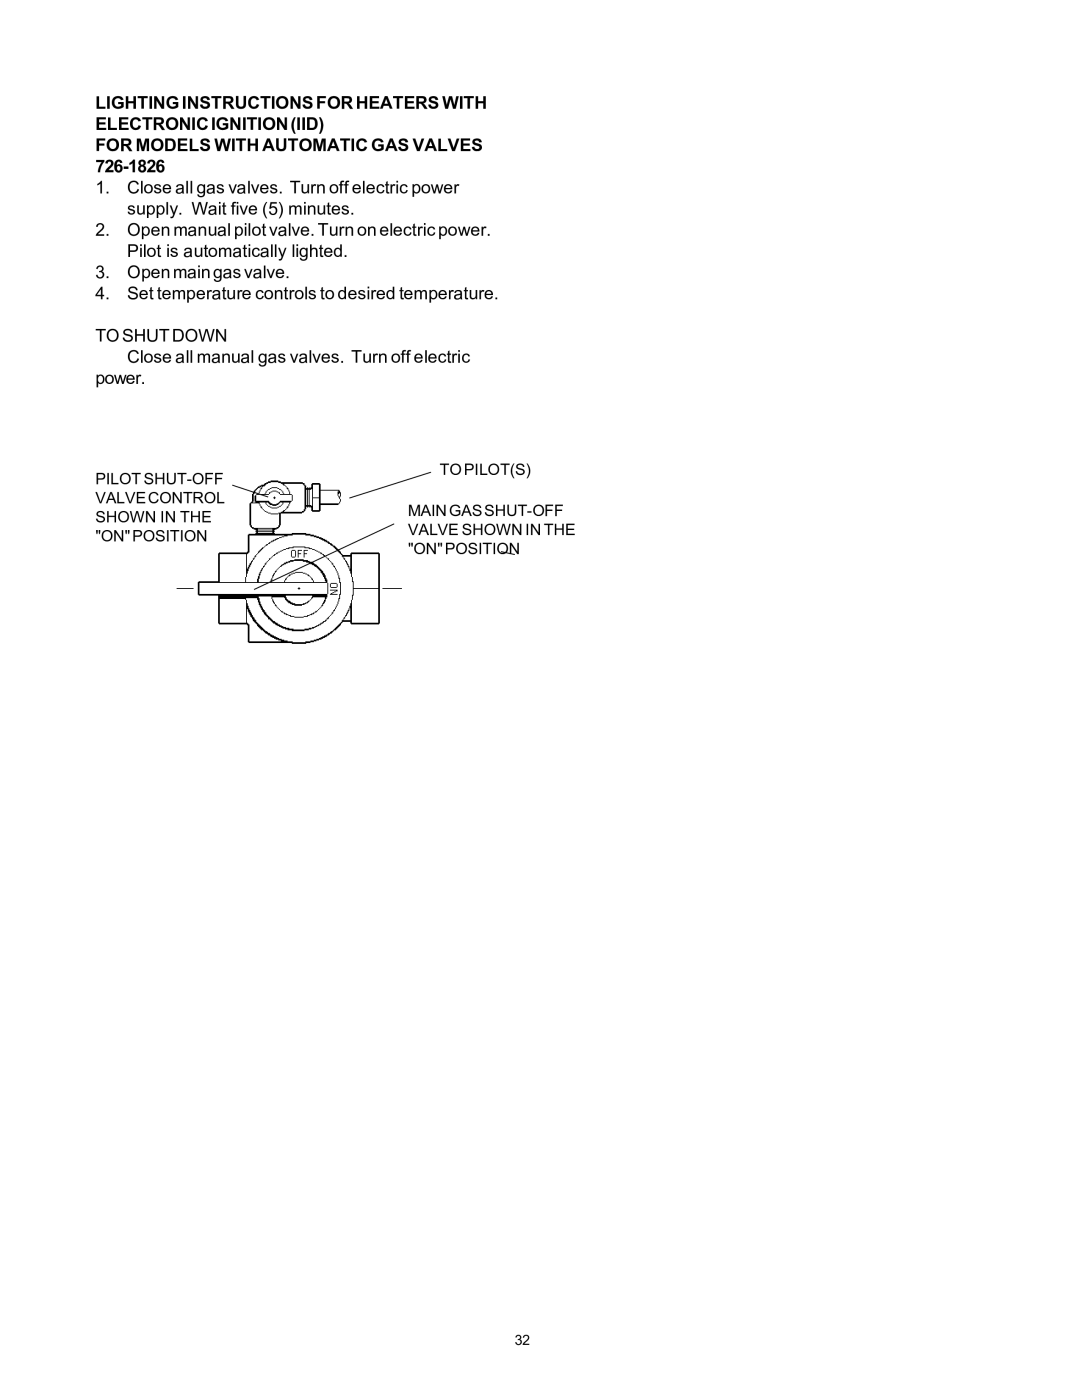 Rheem 136-1826 installation instructions To Shut Down, Close all manual gas valves. Turn off electric power 